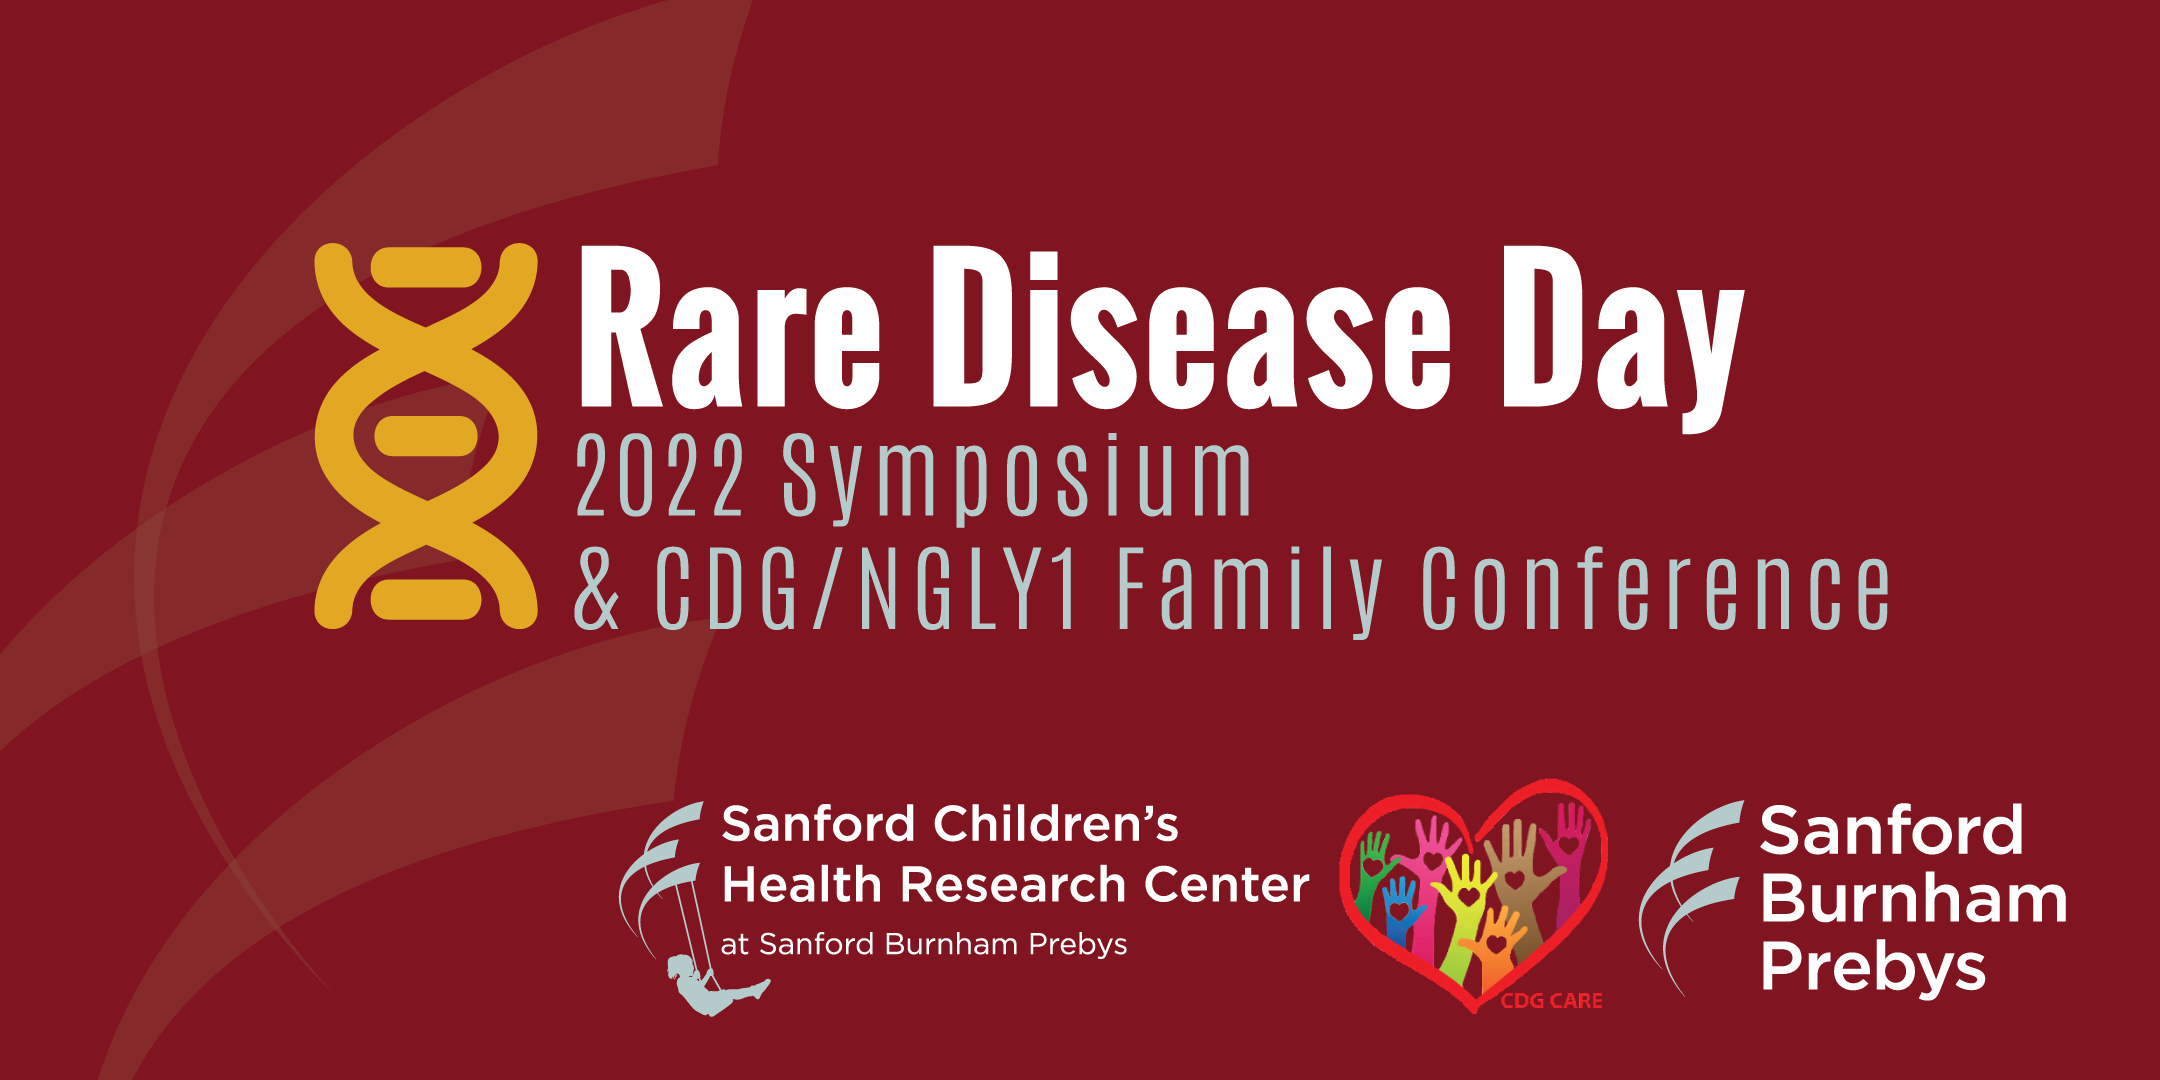 2022 Rare Disease Day Symposium & CDG/NGLY1 Family Conference